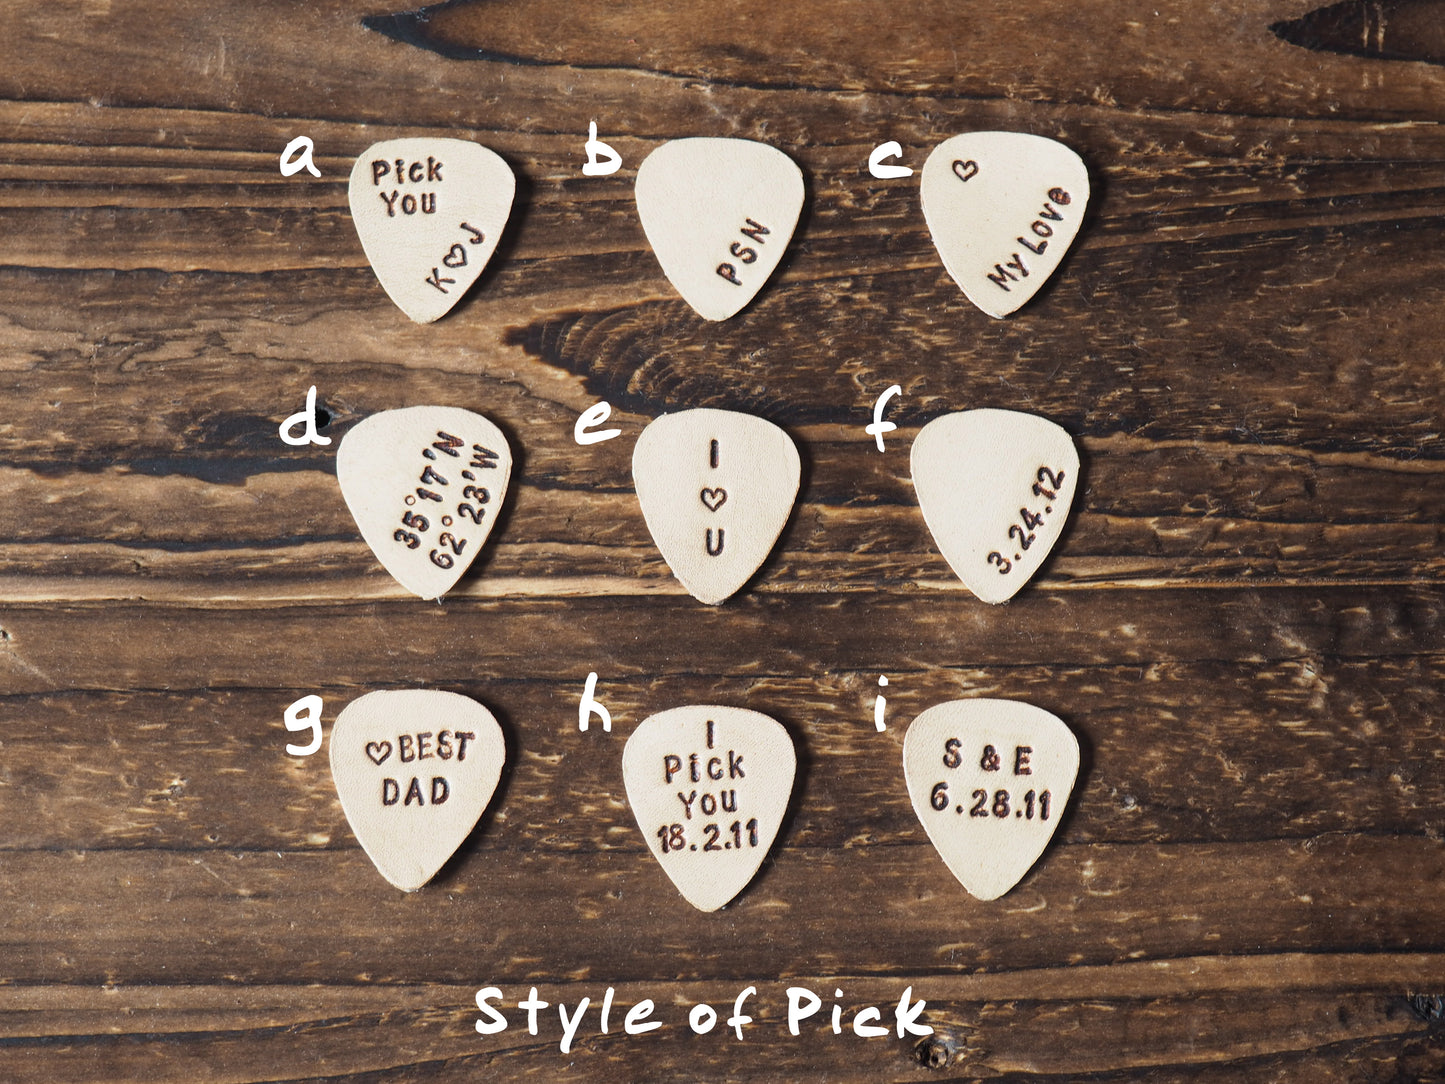 Get your 2nd engraved Leather Pick for $5